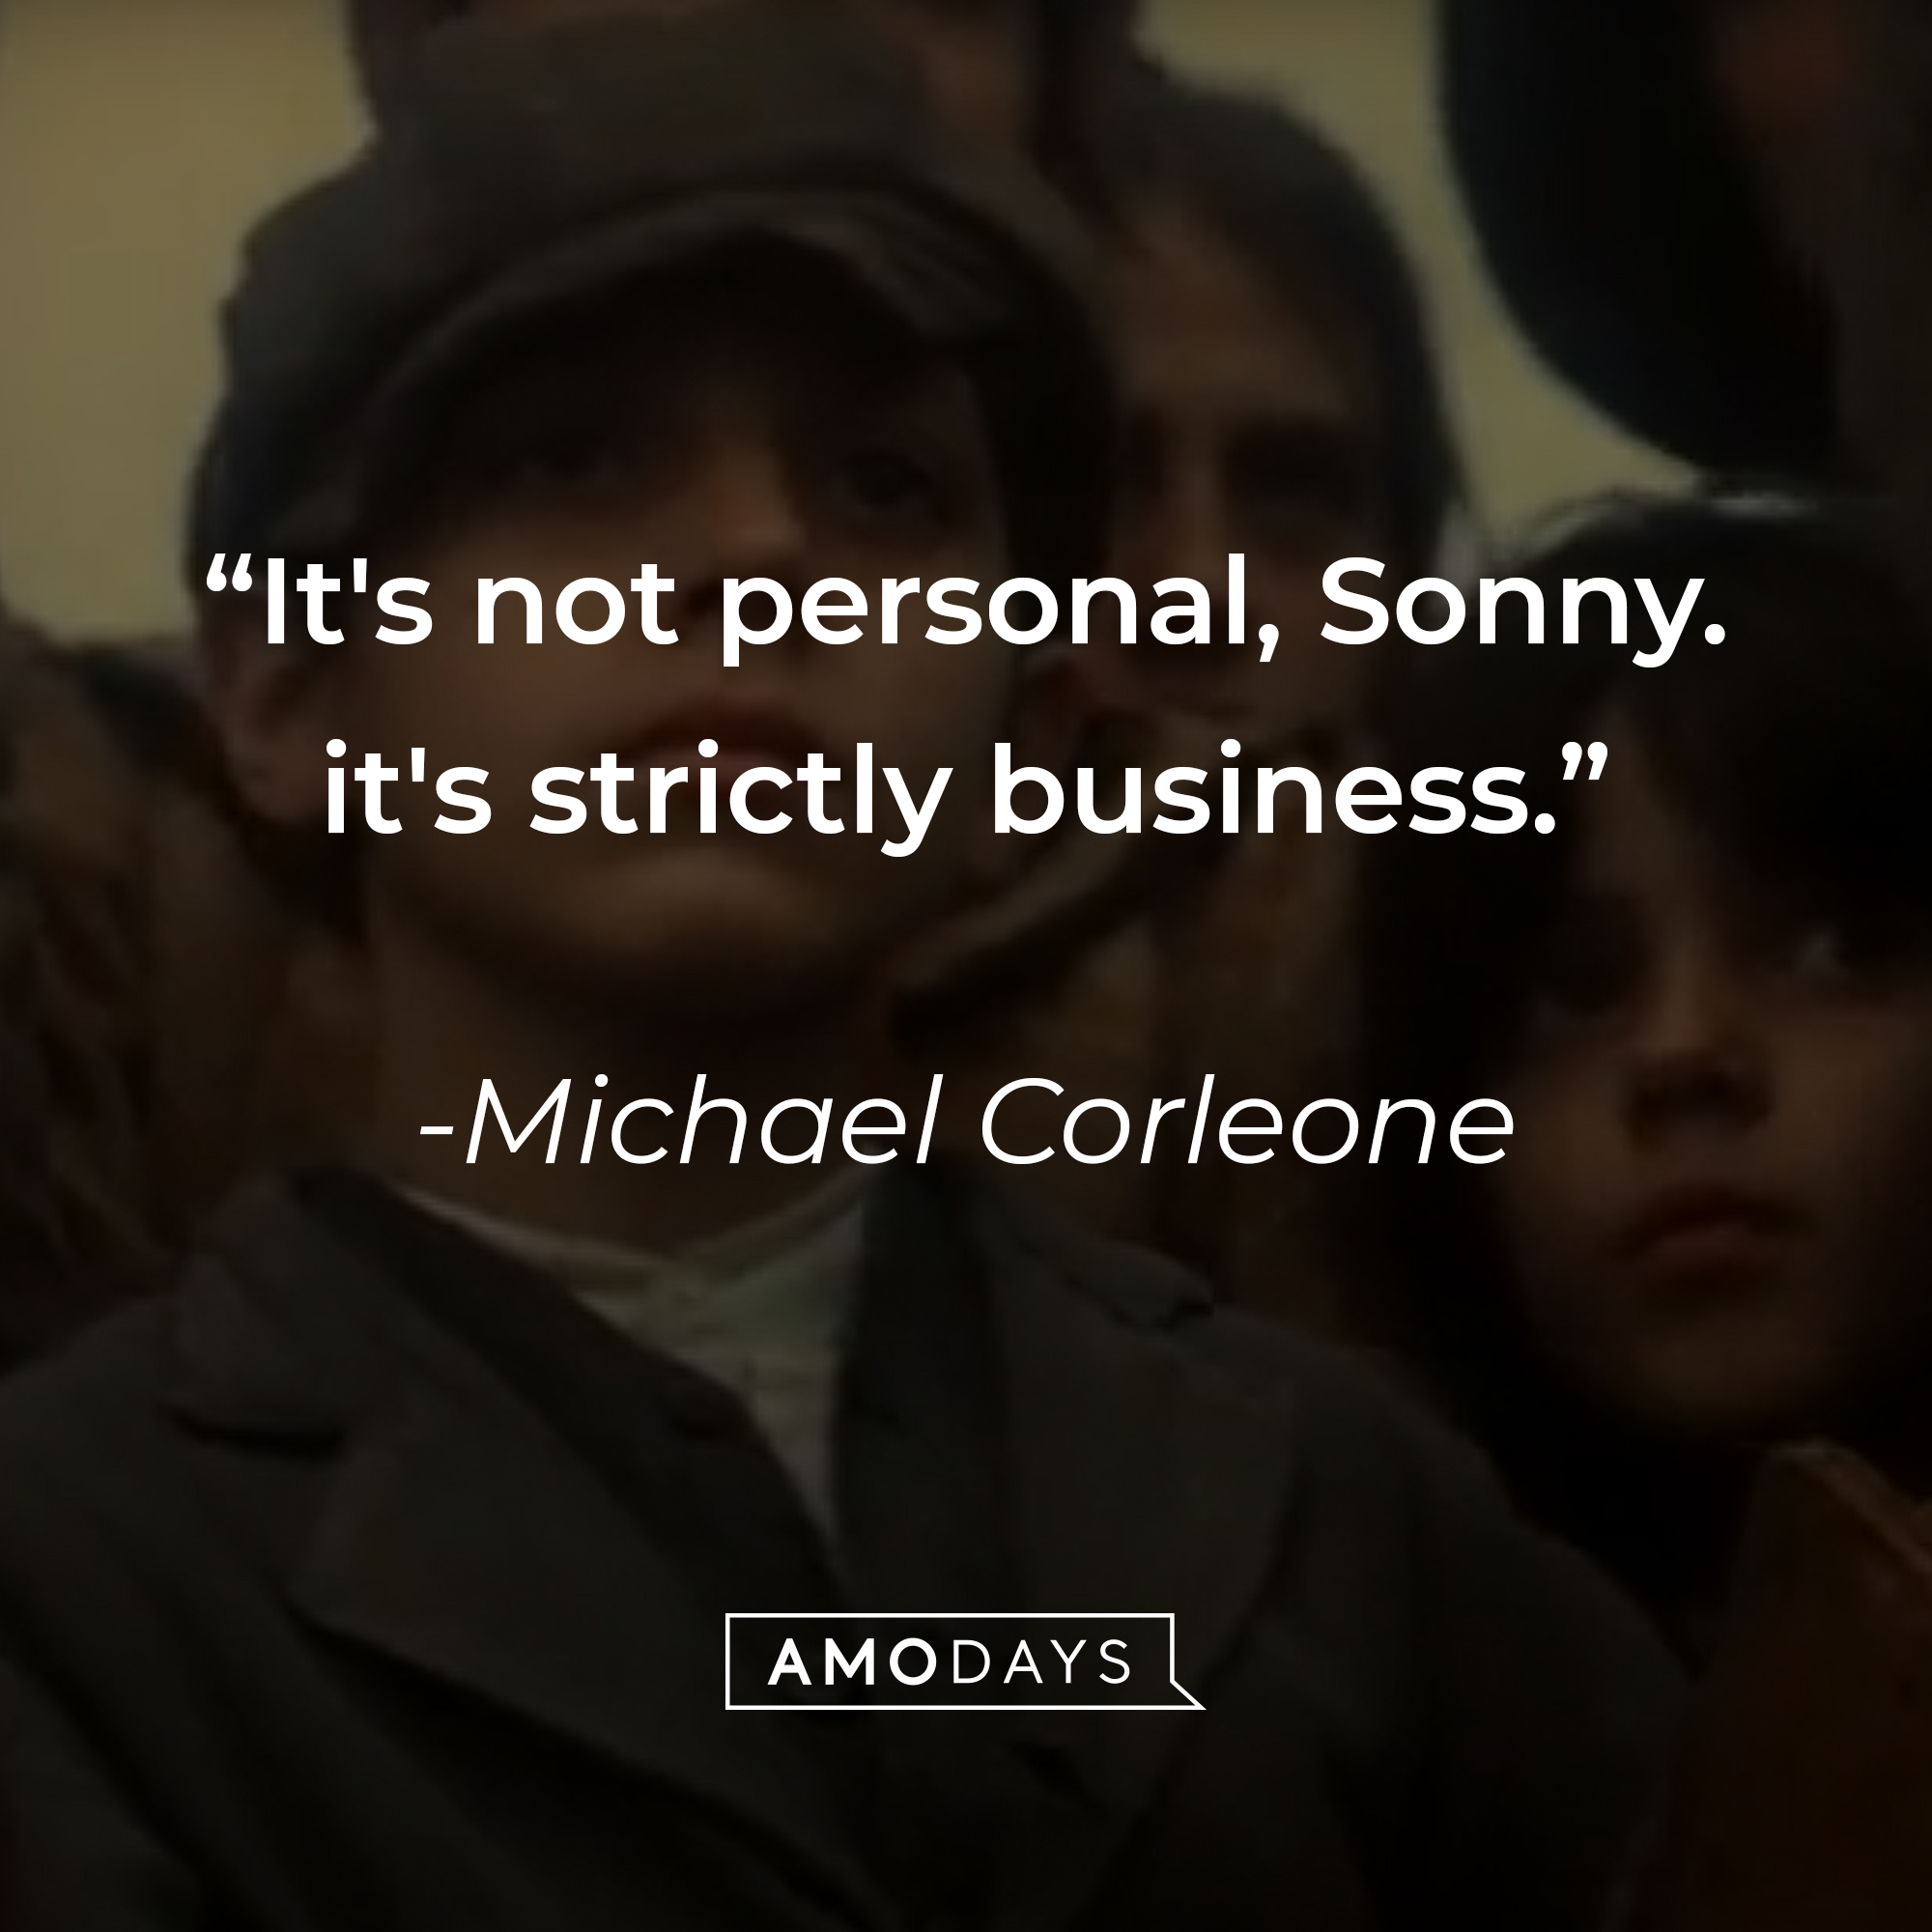 A photo of from "The Godfather II" with the quote, "It's not personal, Sonny. it's strictly business." | Source/YouTube/paramountmovies